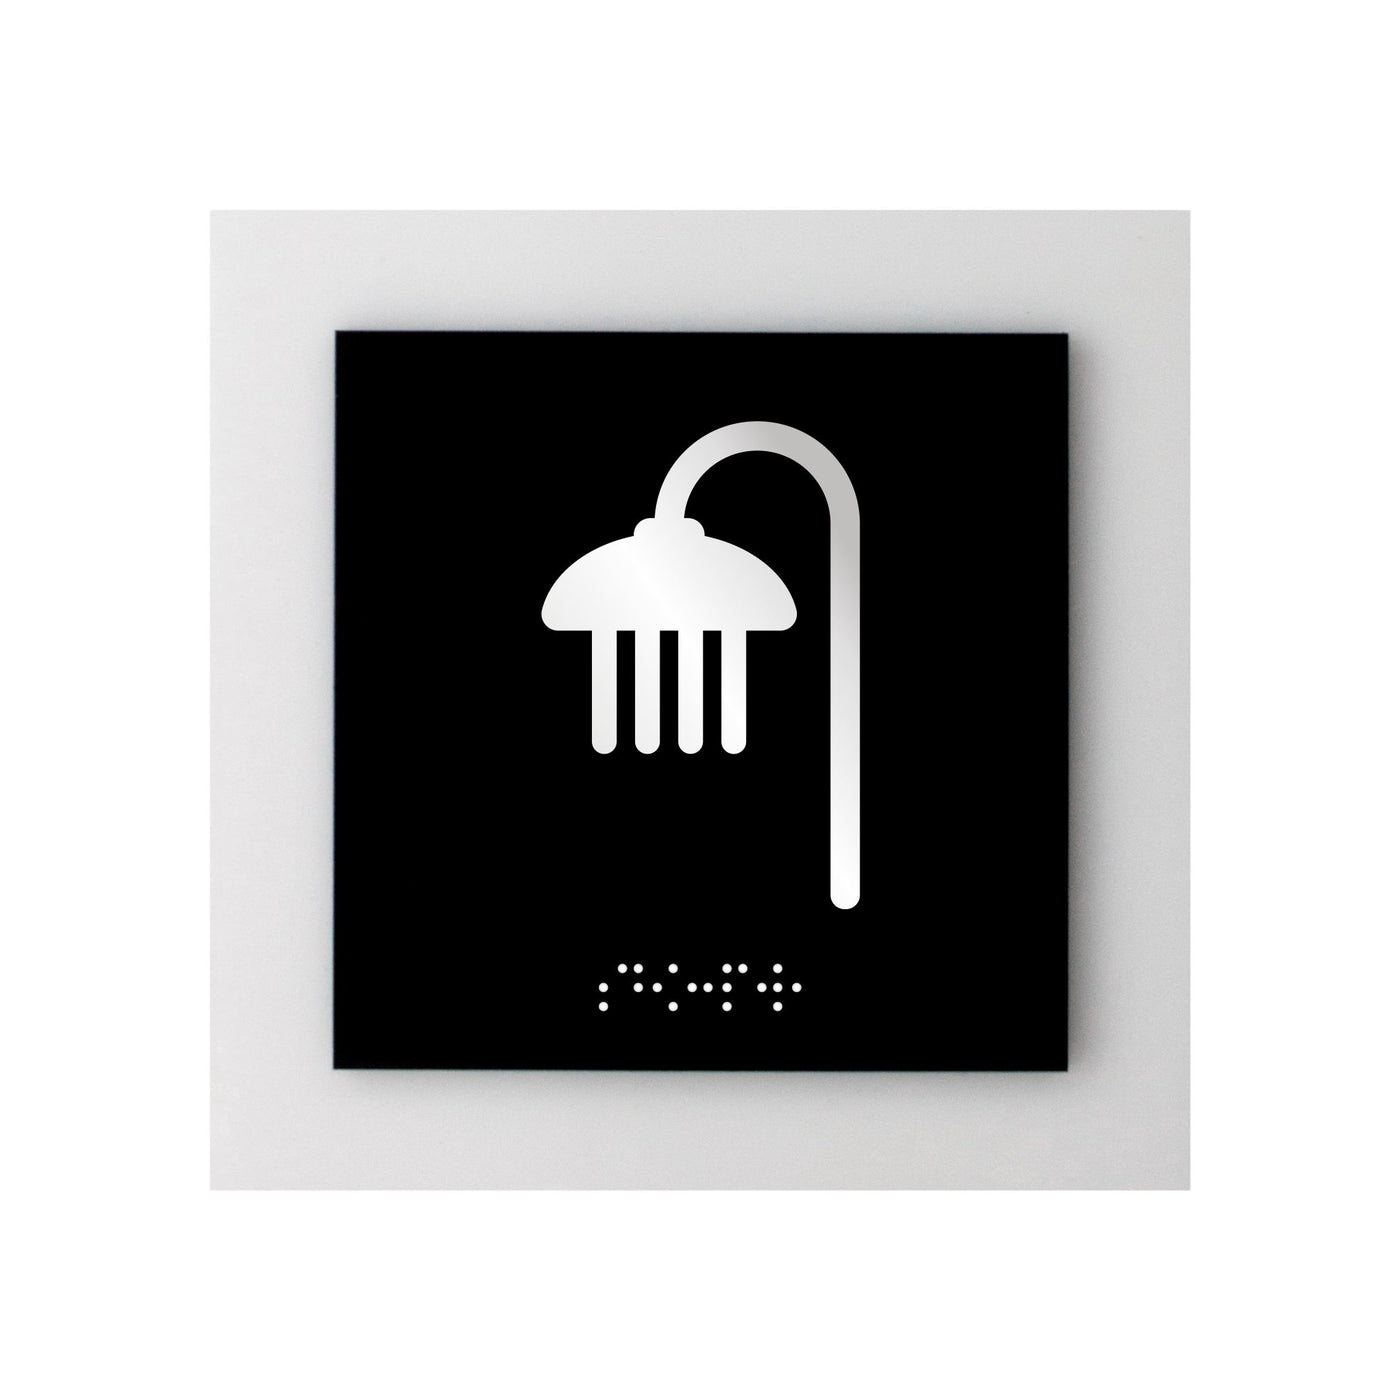 Acrylic Shower Room Sign "Simple" Design